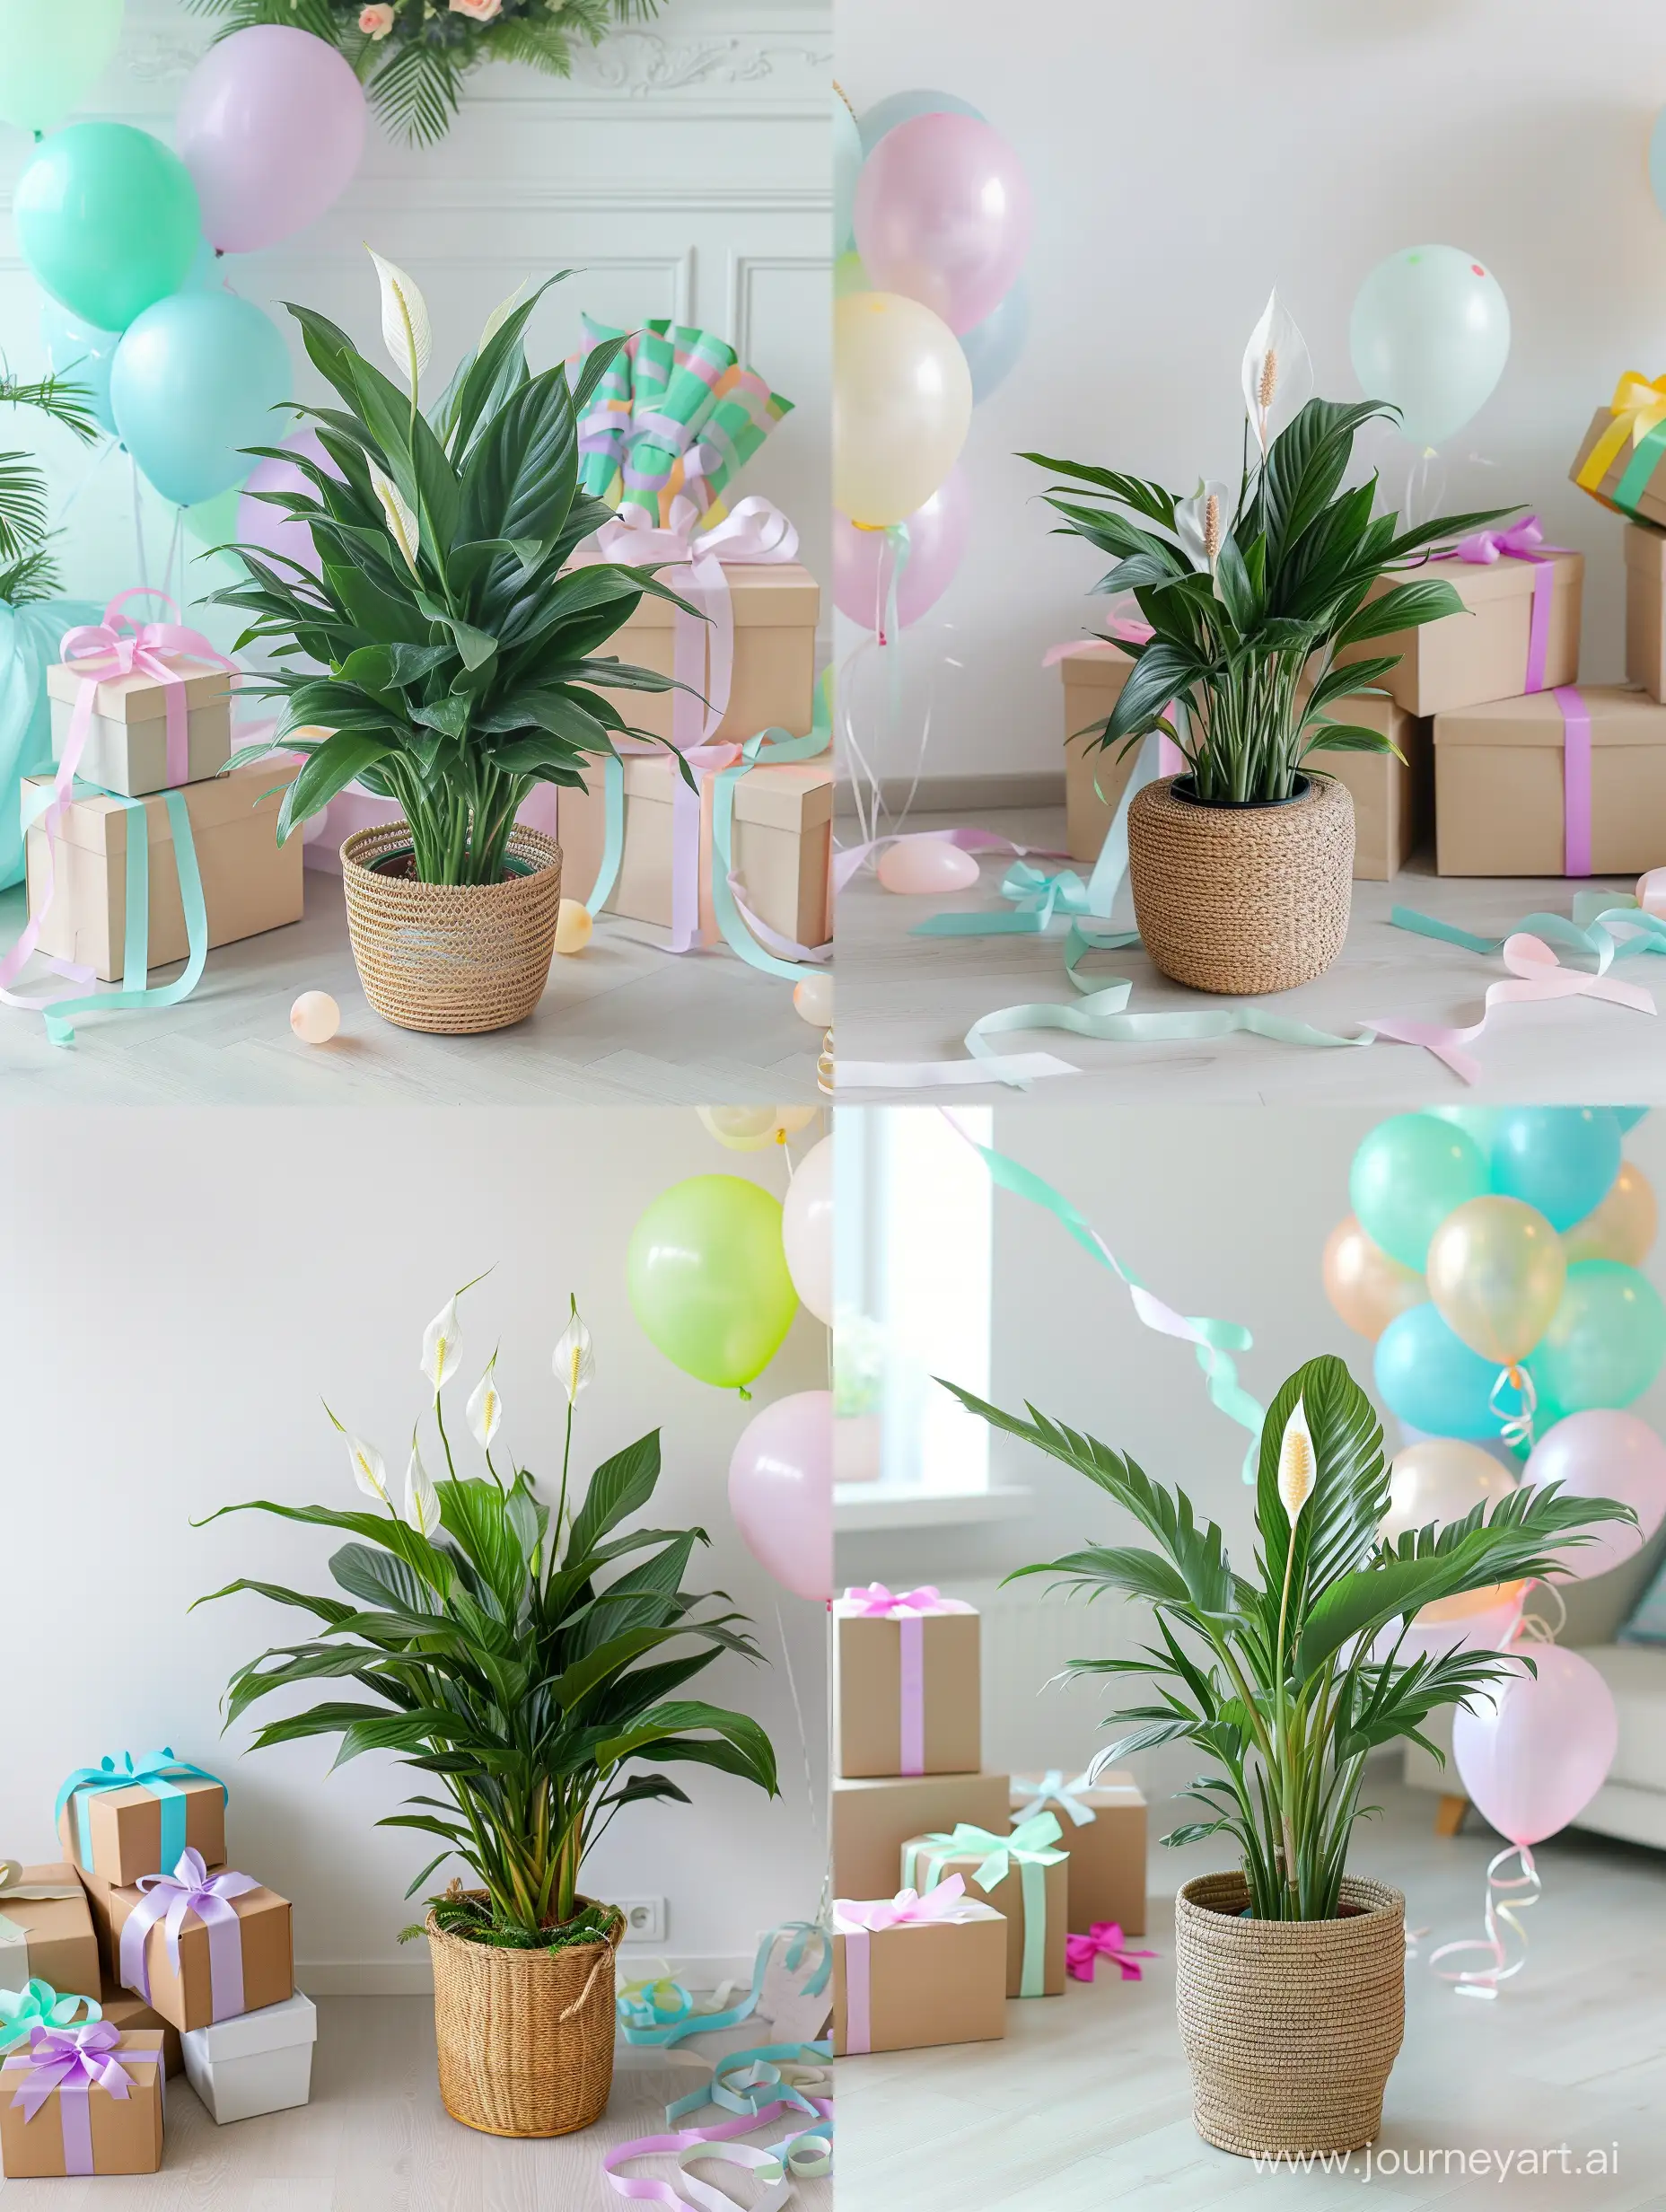 PastelColored-Celebration-Spathiphyllum-Plant-with-Ribbons-and-Balloons